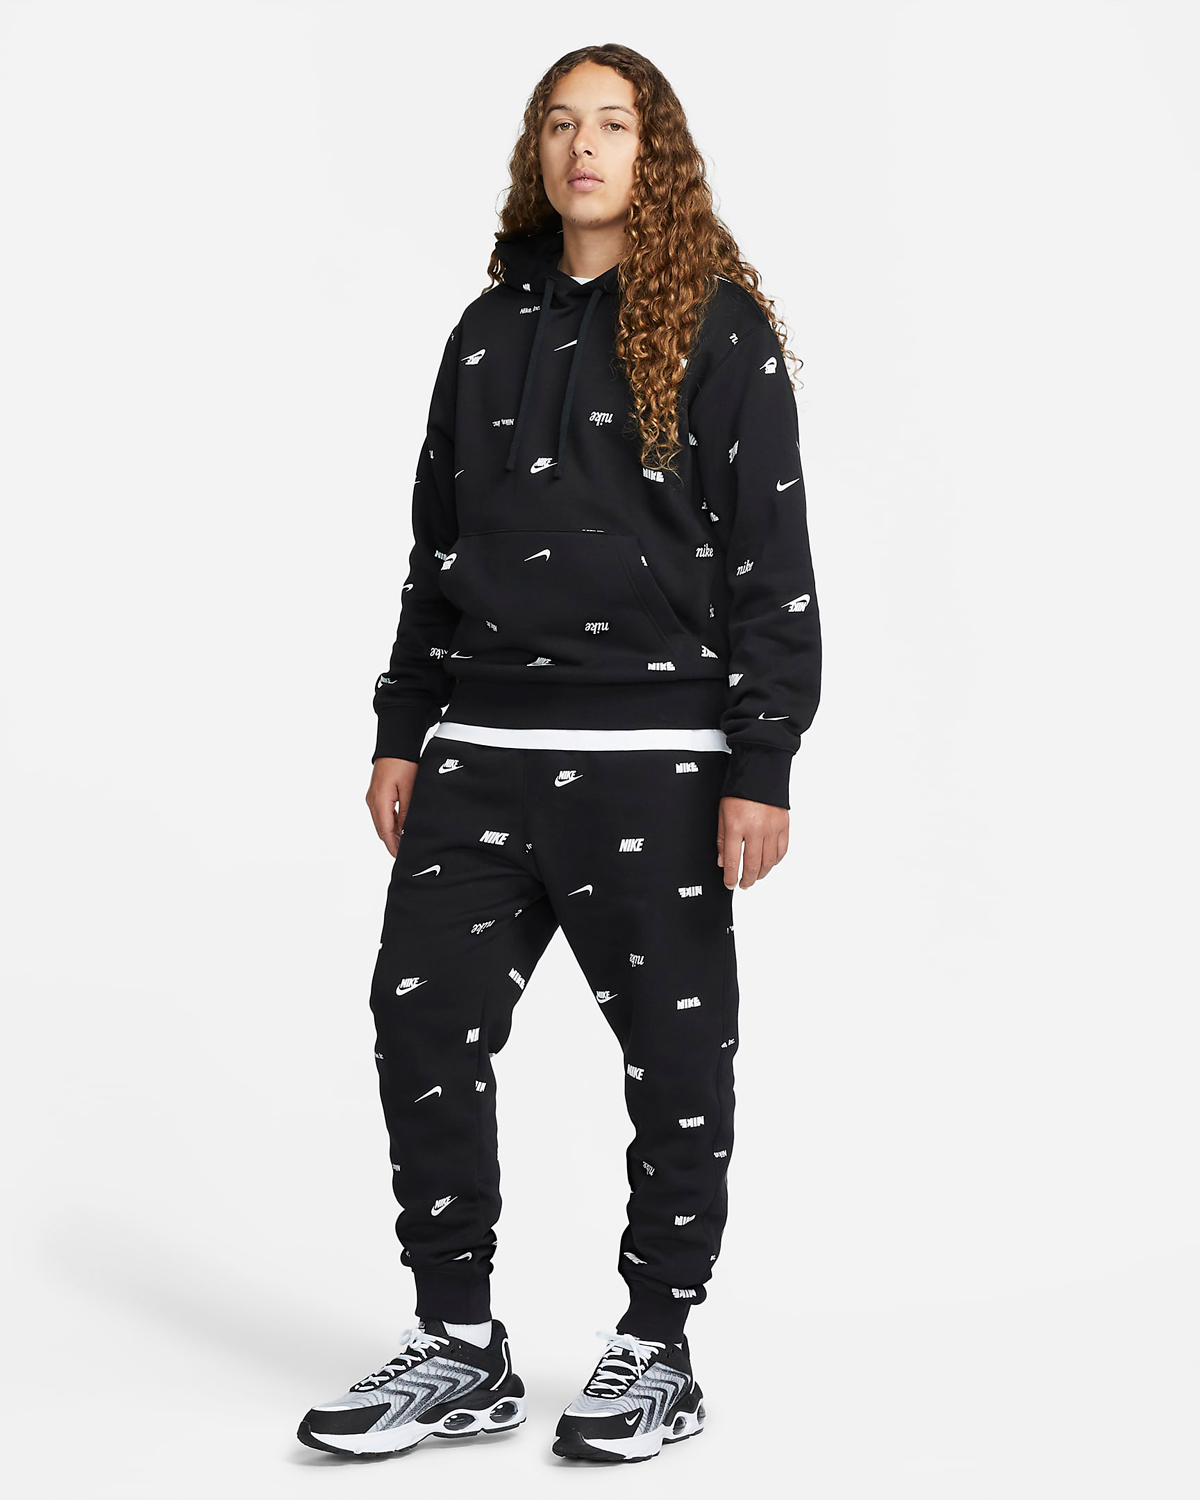 Nike-Club-Allover-Print-Hoodie-Jogger-Pants-Black-White-Outfit